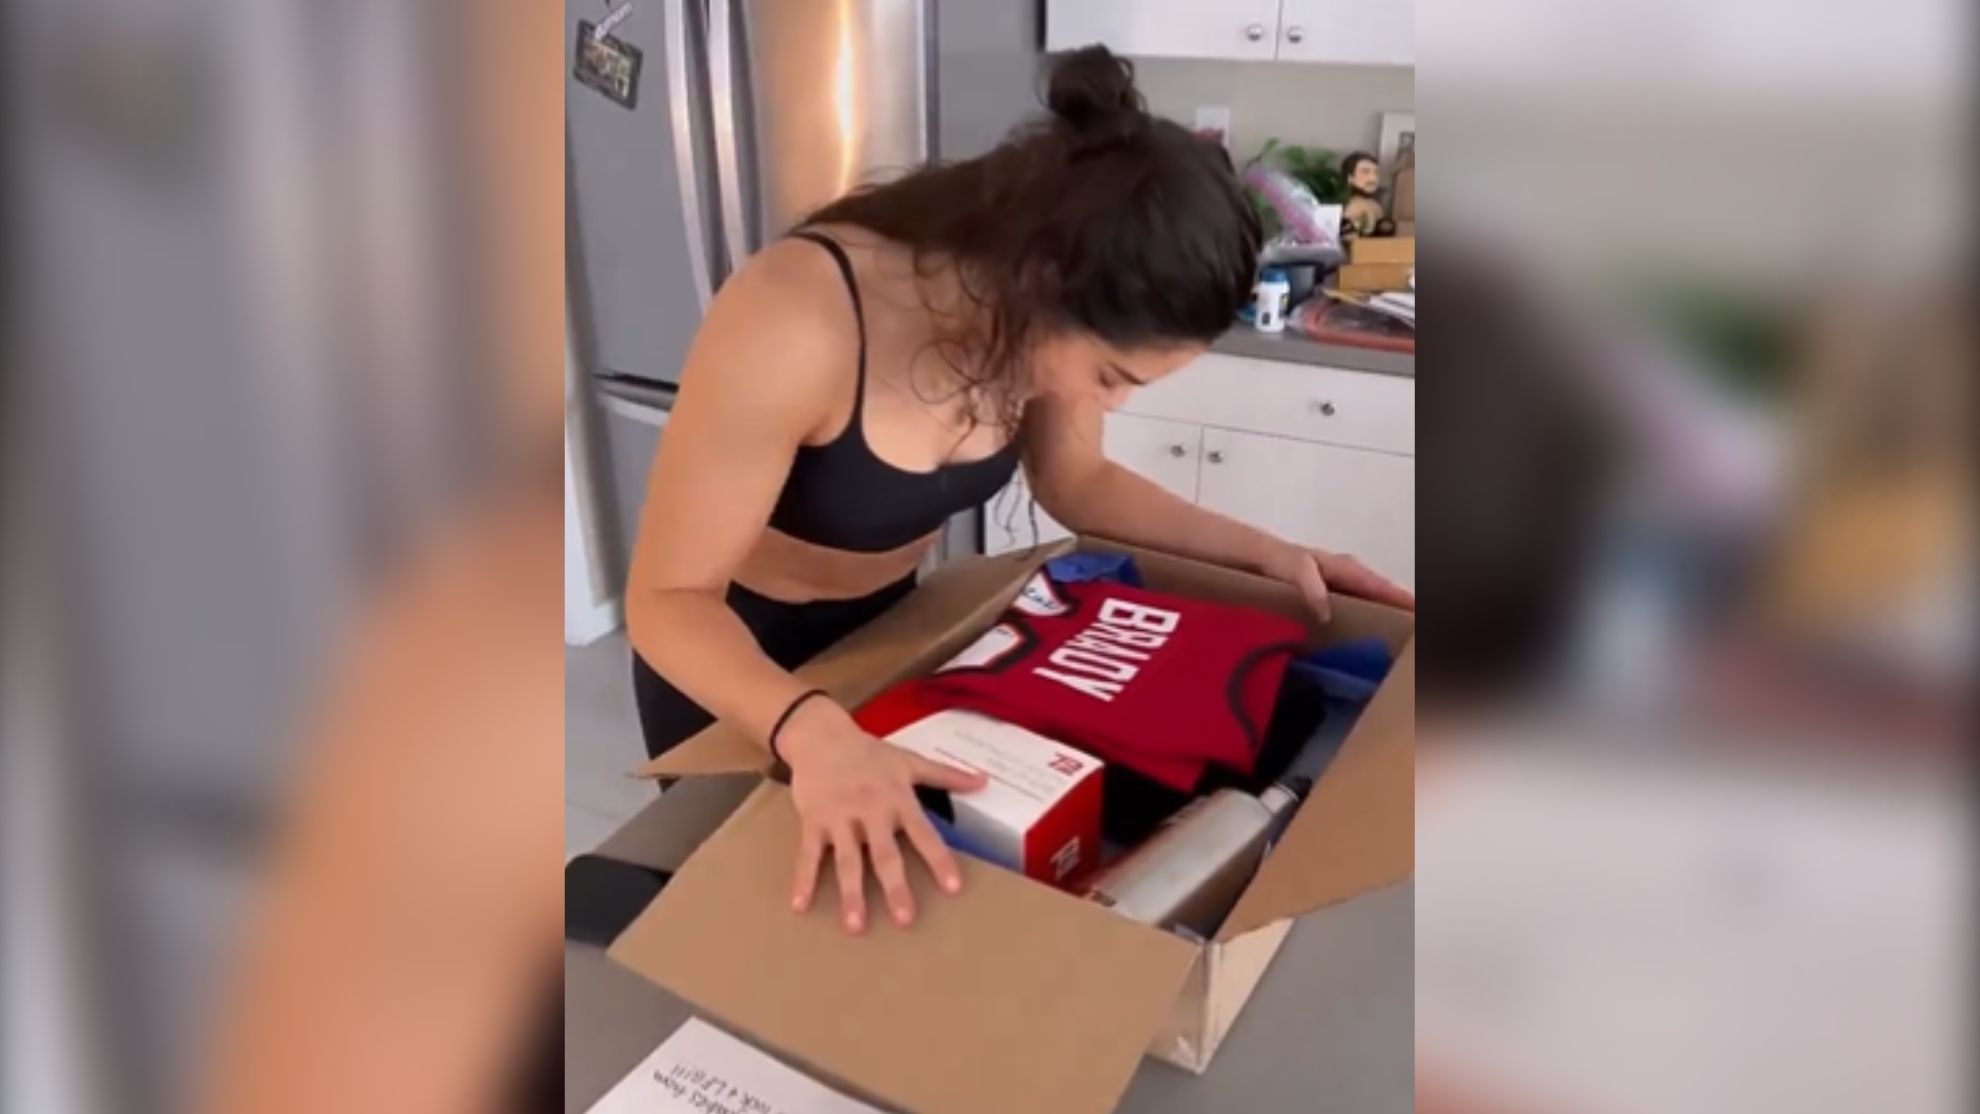 Tom Brady sends WNBA star his signed jersey, her wholesome